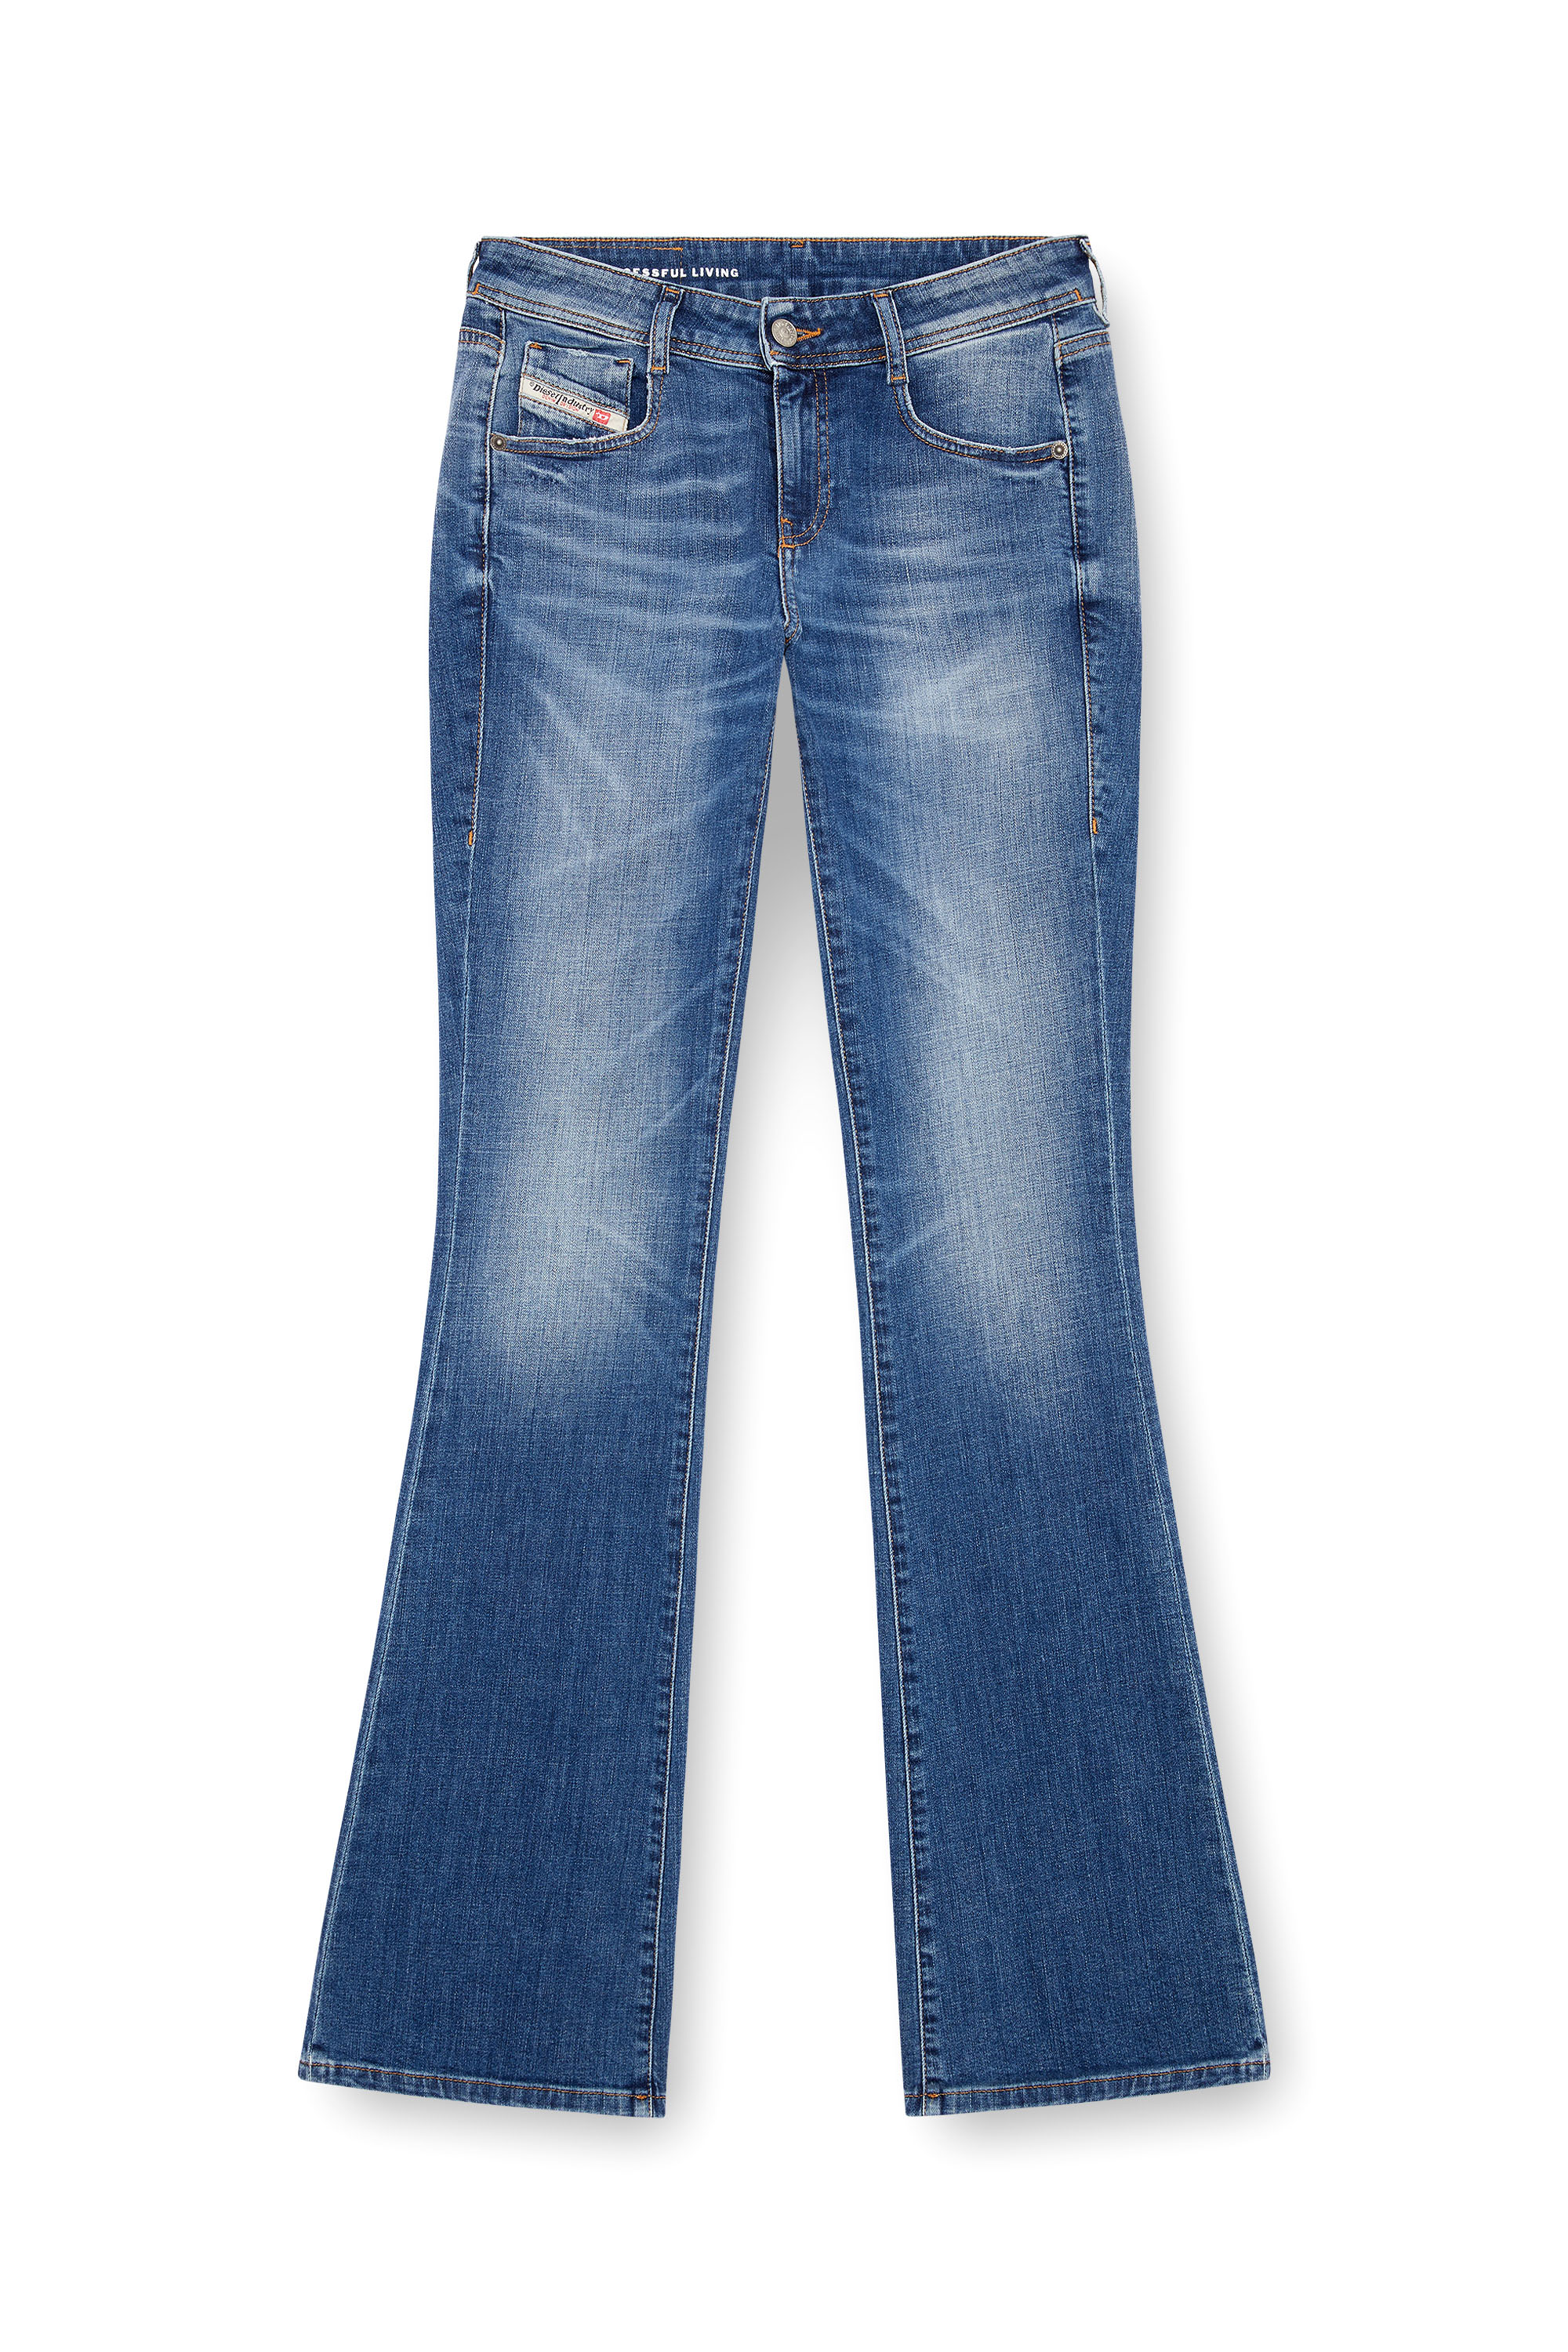 Diesel - Bootcut and Flare Jeans 1969 D-Ebbey 09J33, Mujer Bootcut y Flare Jeans - 1969 D-Ebbey in Azul marino - Image 3